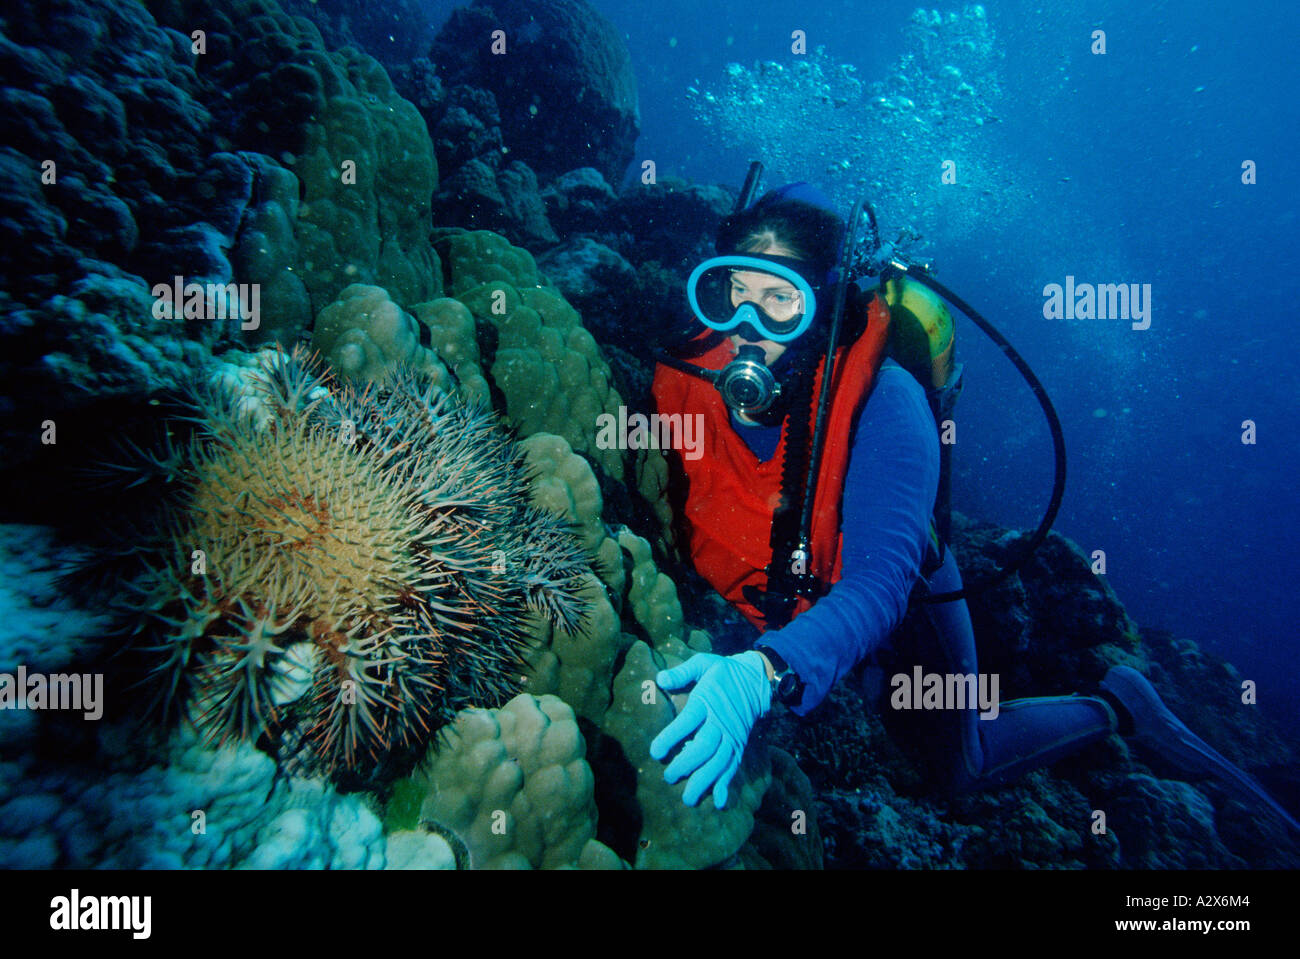 Australia. Great Barrier Reef. Scuba diving woman underwater by coral reef with Crown of Thorns destructive starfish. Stock Photo